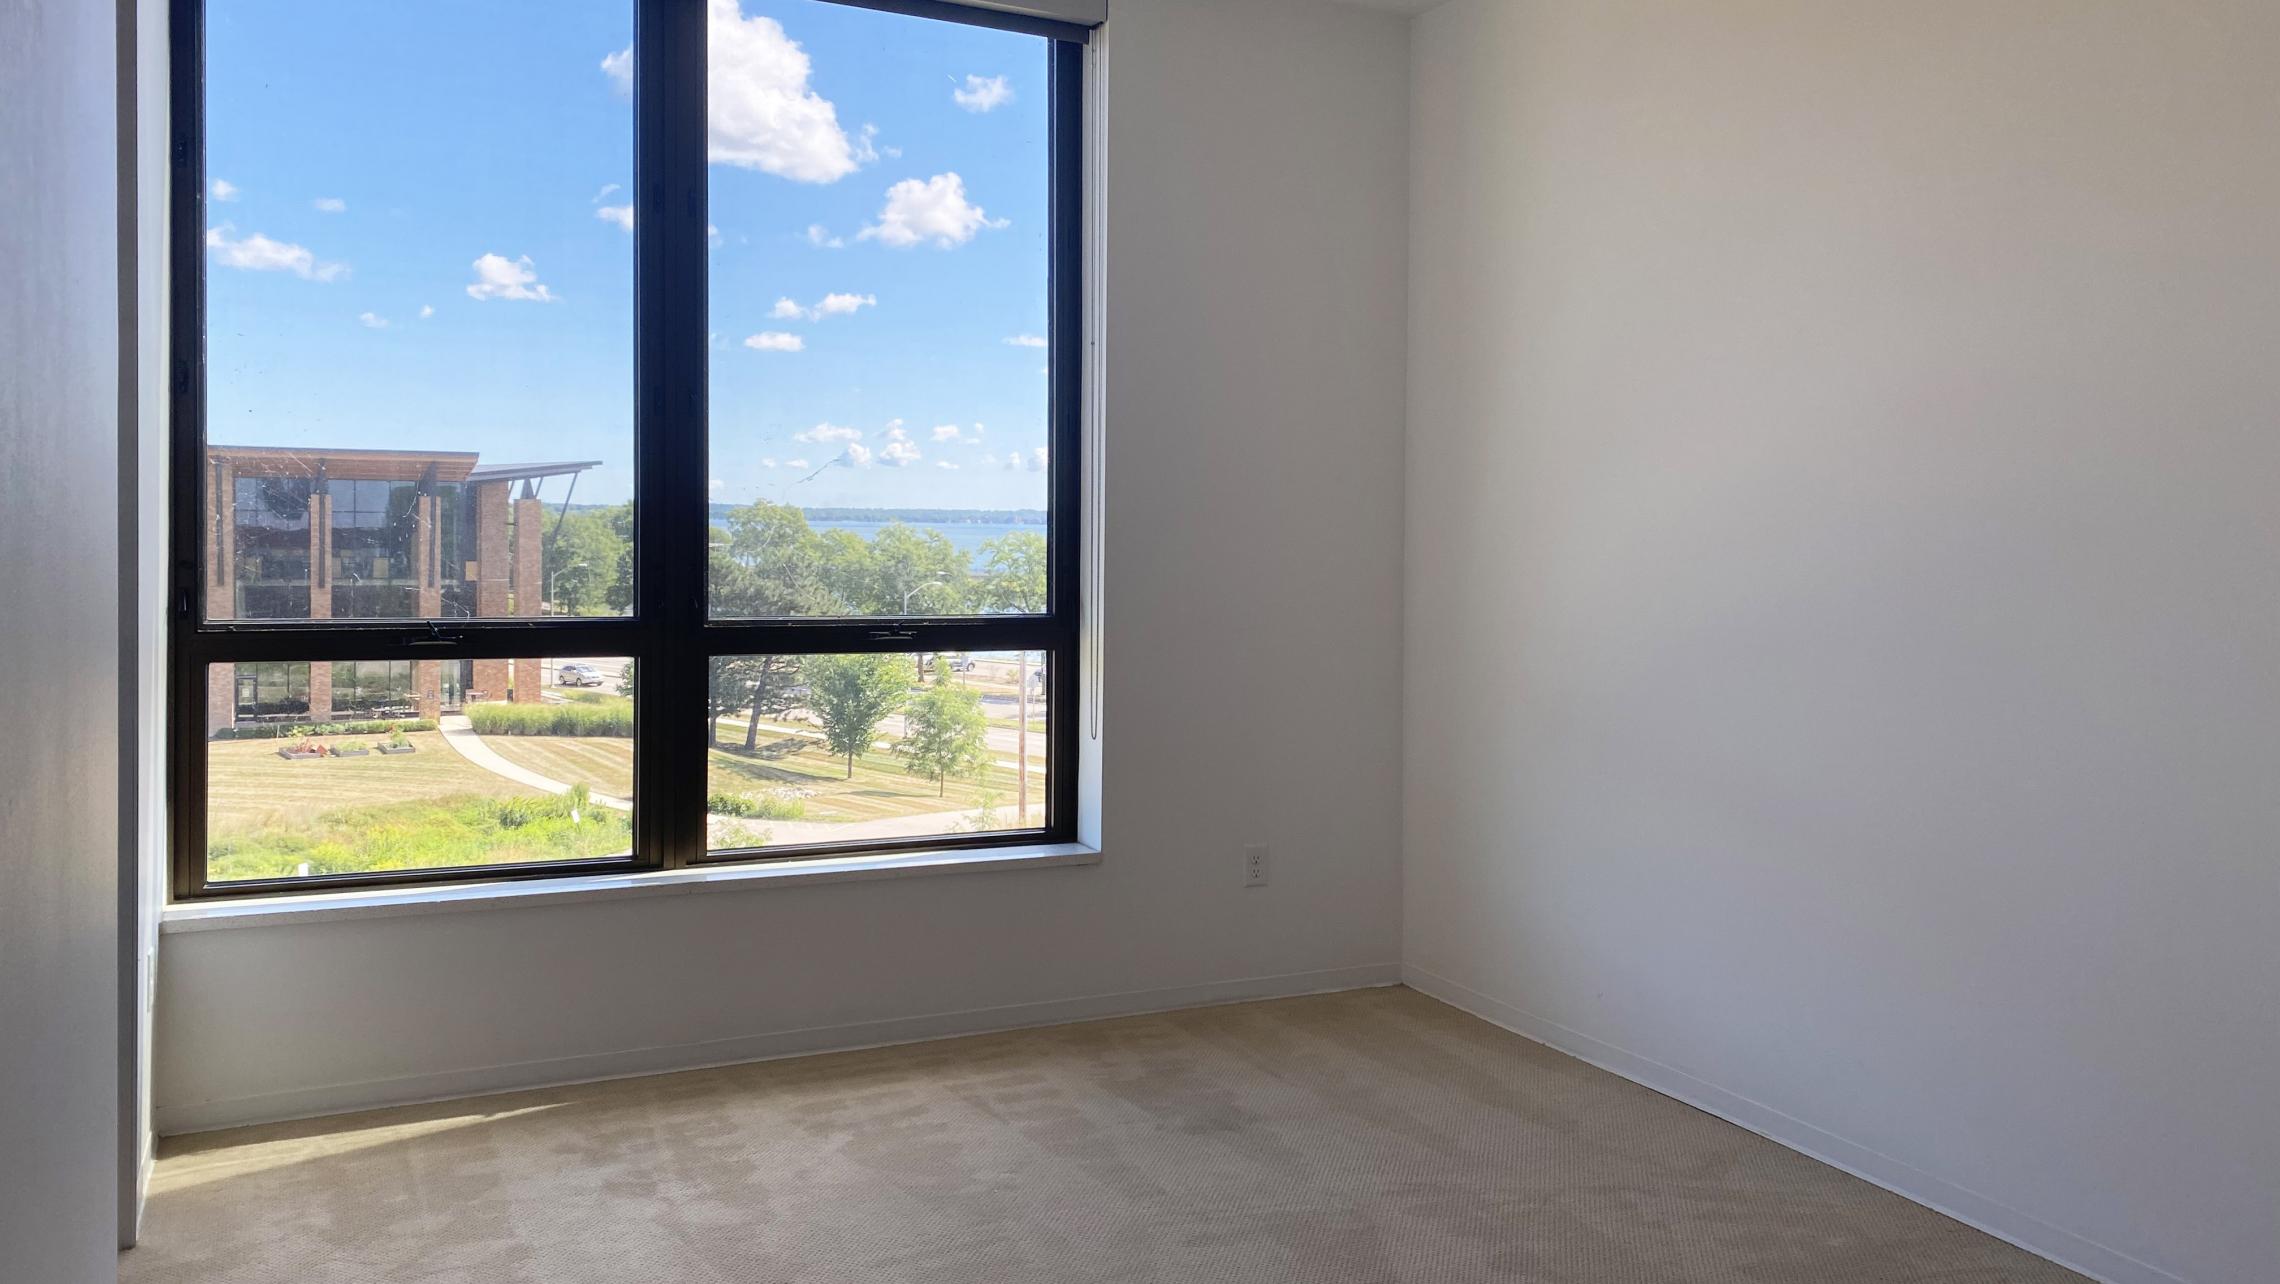 SEVEN27-at-The-Yards-Apartment-440-Two-bedroom-Corner-Lake-View-Modern-Upscale-Design-Balcony-Terrace-Fitness-Lounge-Courtyard-Dogs-Cats